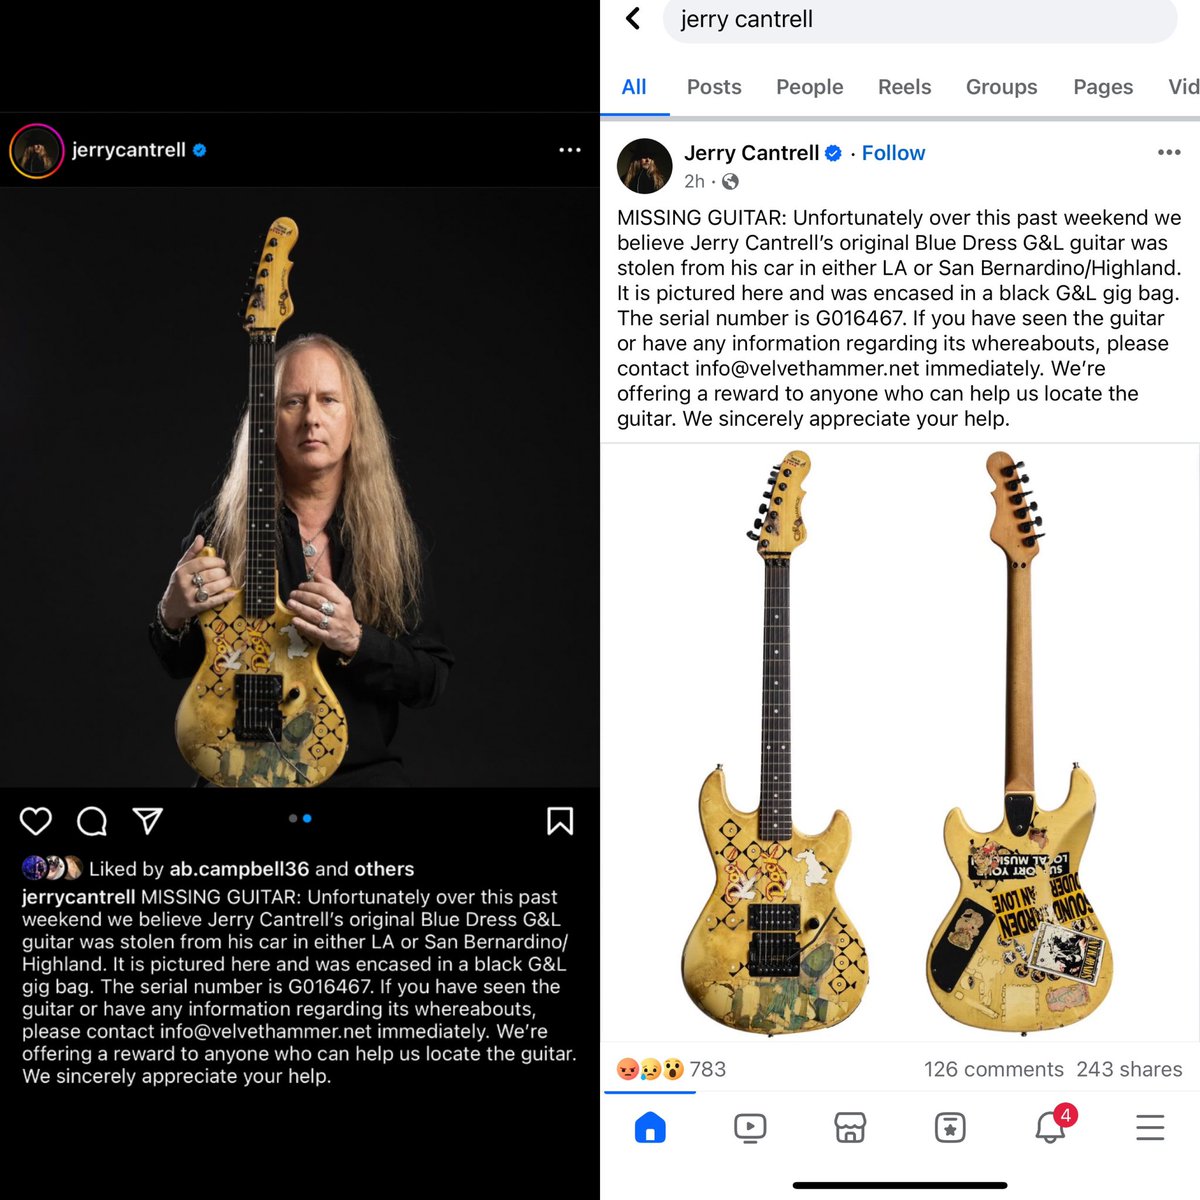 ALMIGHTY BLACK LABEL FAMILY!!! FATHER JERRY CANTRELL’S BELOVED G&L FIDDLE HAS BEEN STOLEN!!! ANY INFO at PAWNS SHOPS Etc. - LET ME KNOW or REACH OUT TO FATHER JERRYS SOCIAL MEDIA!!! THANKS BL FAMILY!!! @JerryCantrell @AliceInChains